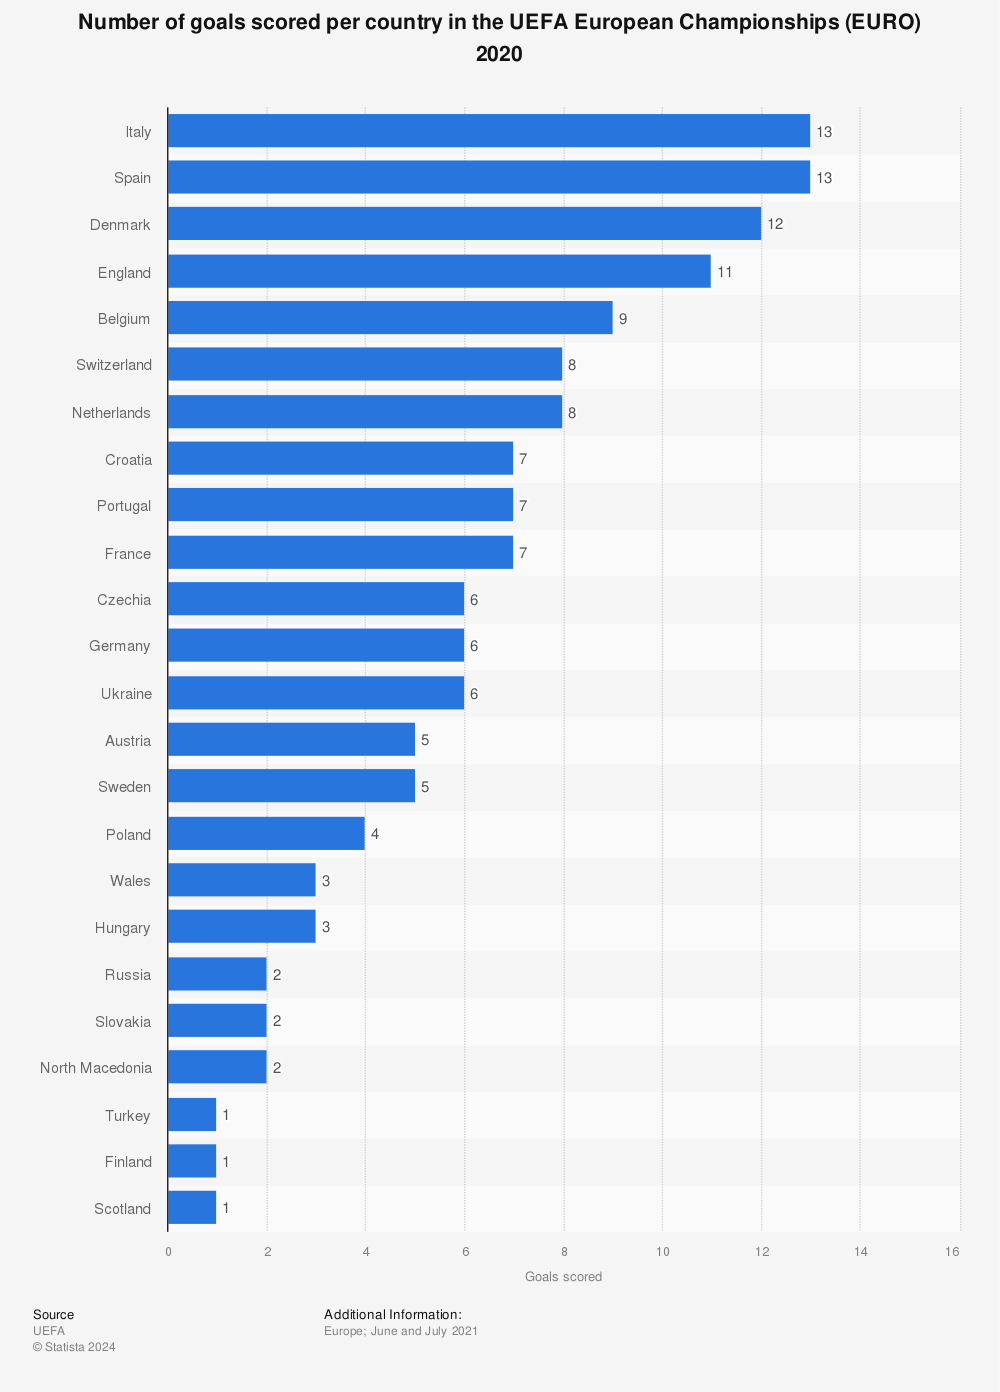 Statistic: Number of goals scored per country in the UEFA European Championships (EURO) 2020 | Statista